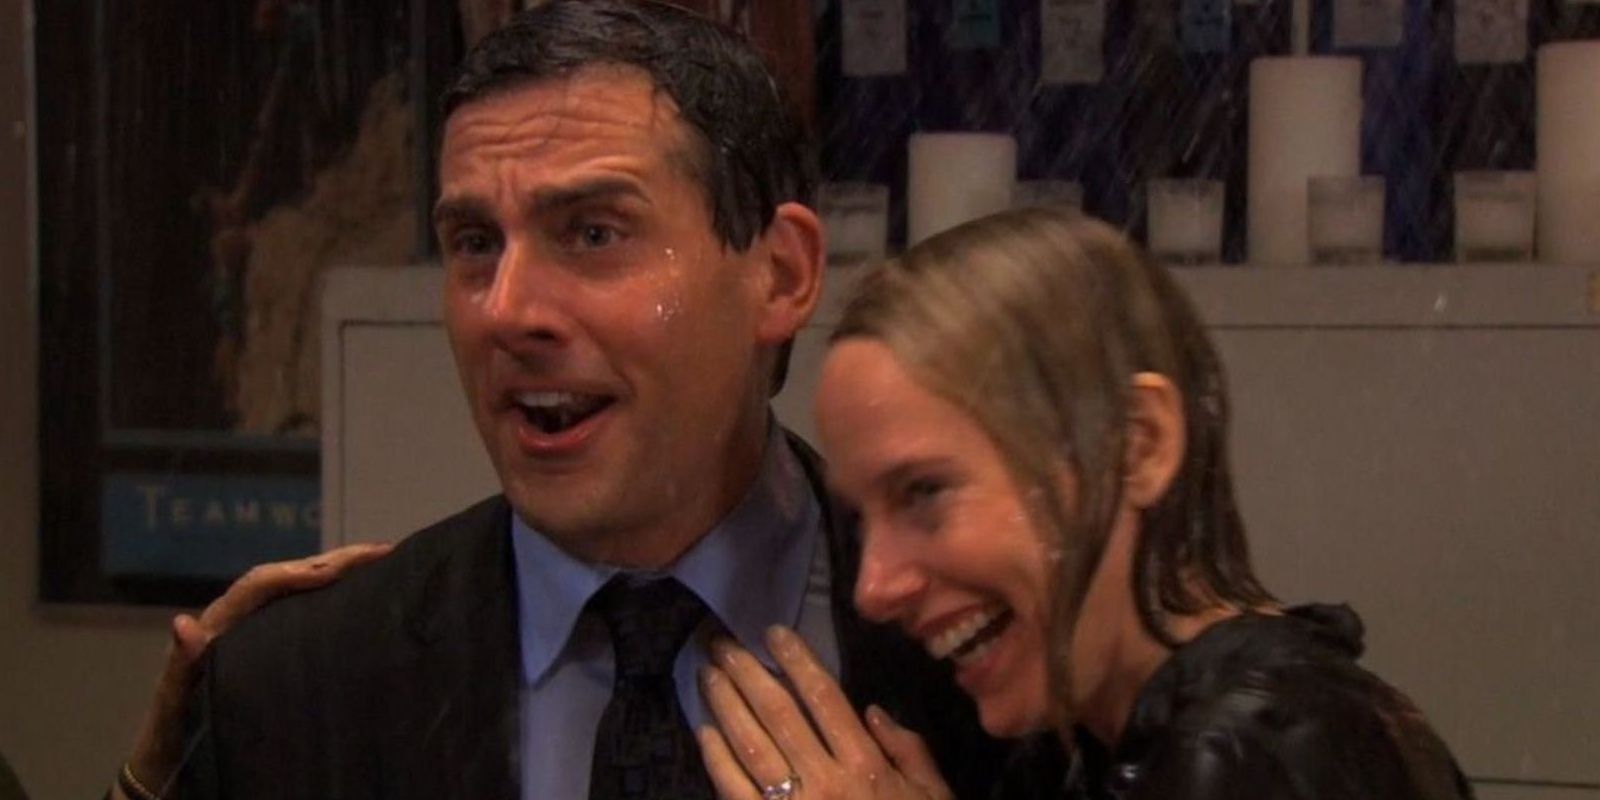 Michael proposes to Holly in The Office